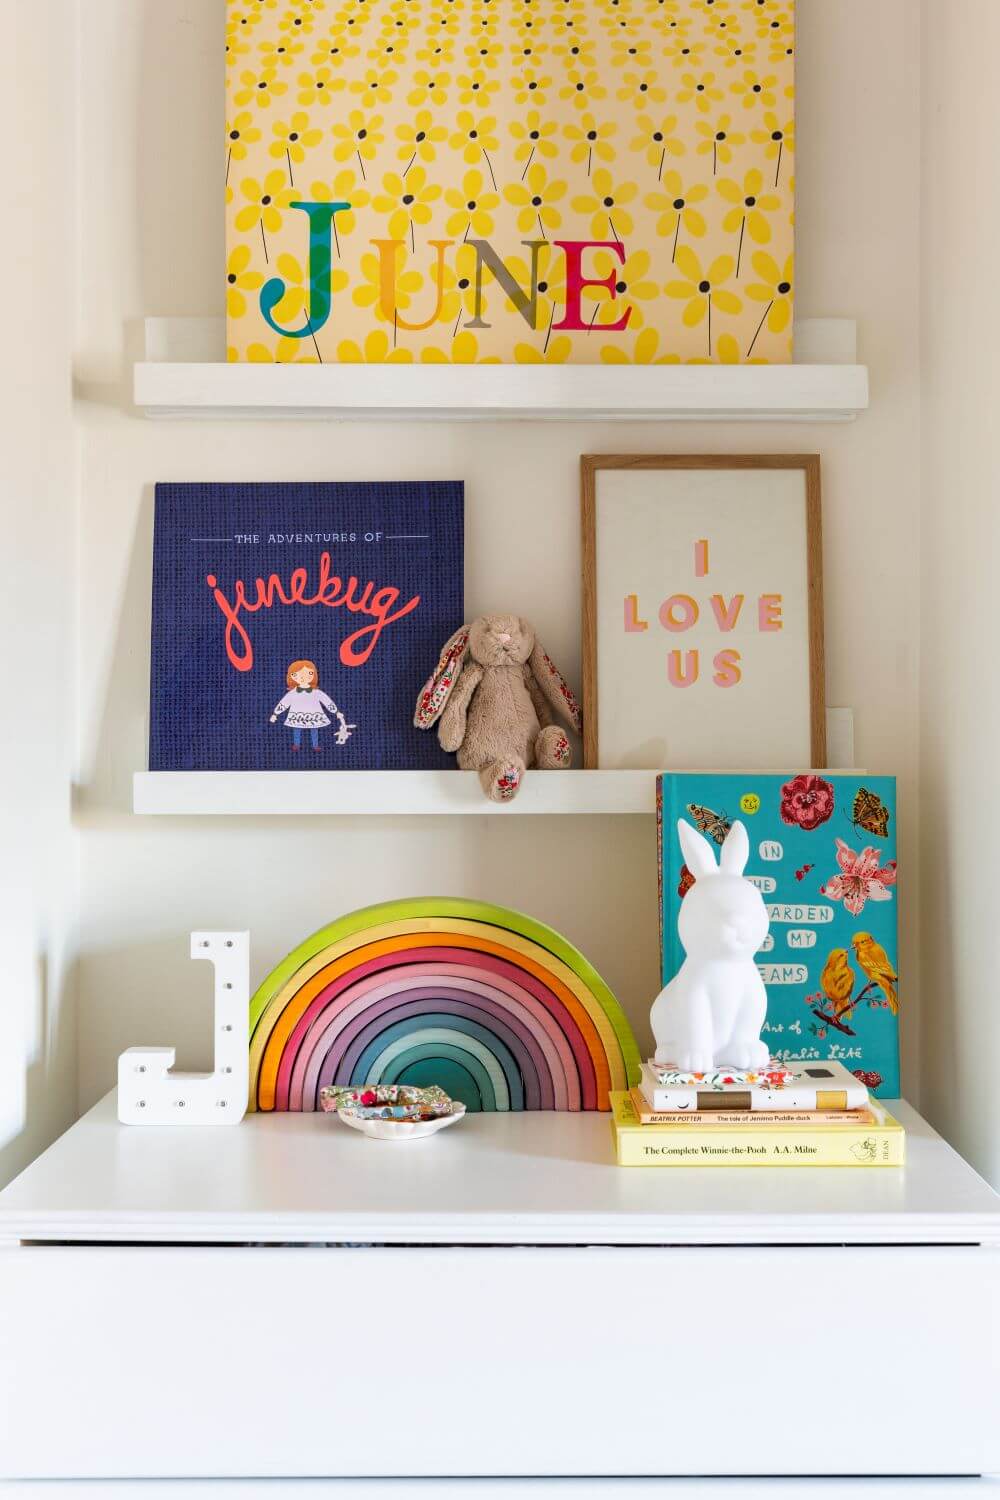 Decorate with Pink Home tour: diy picture shelves ,made form mdf wood and painted white. Styles with colourful decor. 